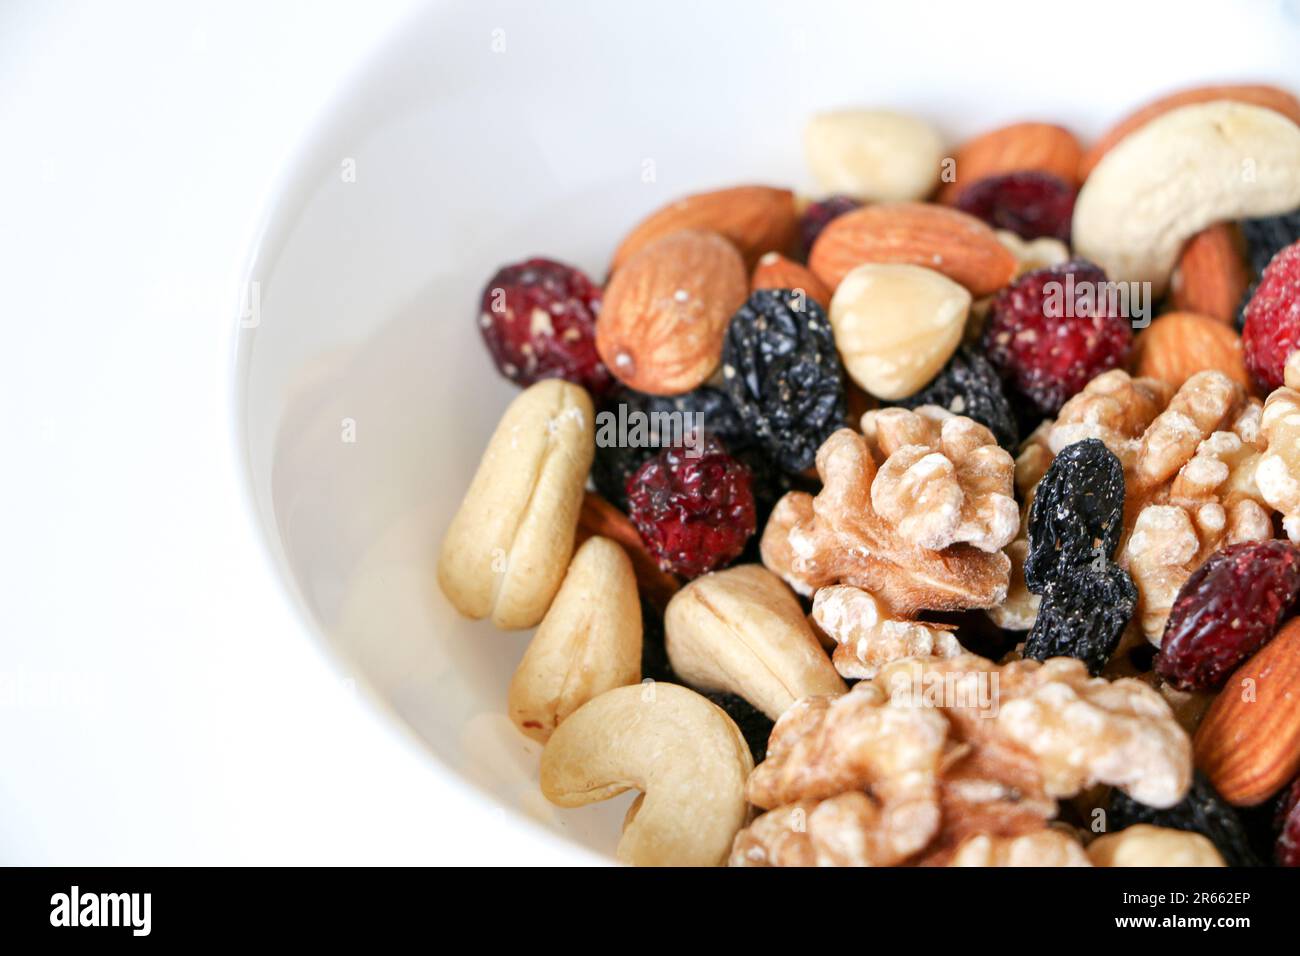 Healthy eating and living concept, close up of mixed nuts and dried fruits of almonds, walnuts, hazelnuts, cashew nuts, raisins and cranberries in a w Stock Photo